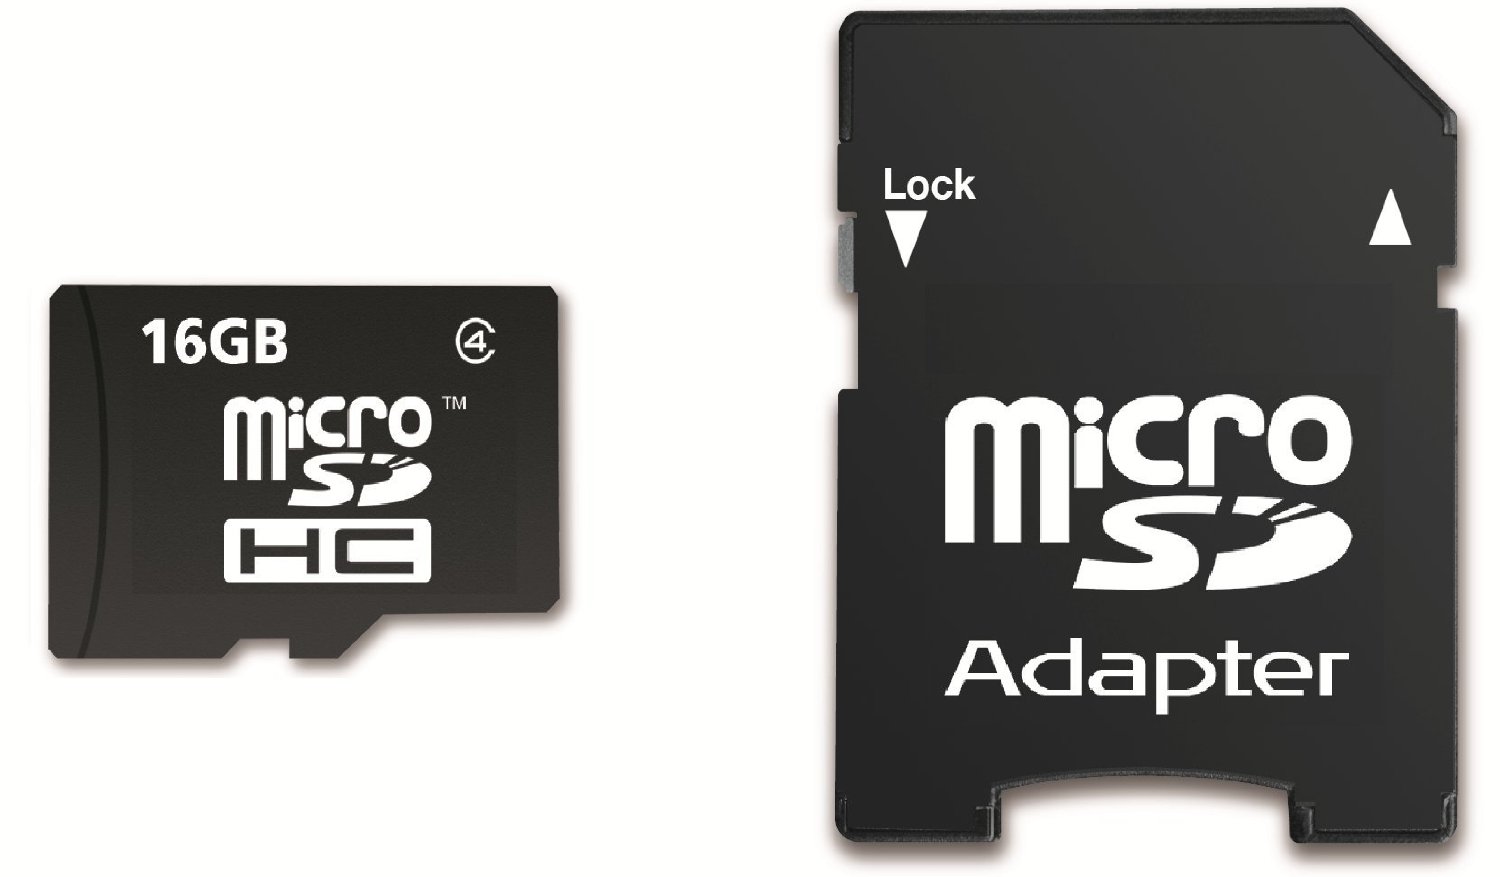 Shark 16GB Micro SDHC Memory Card with SD Adapter